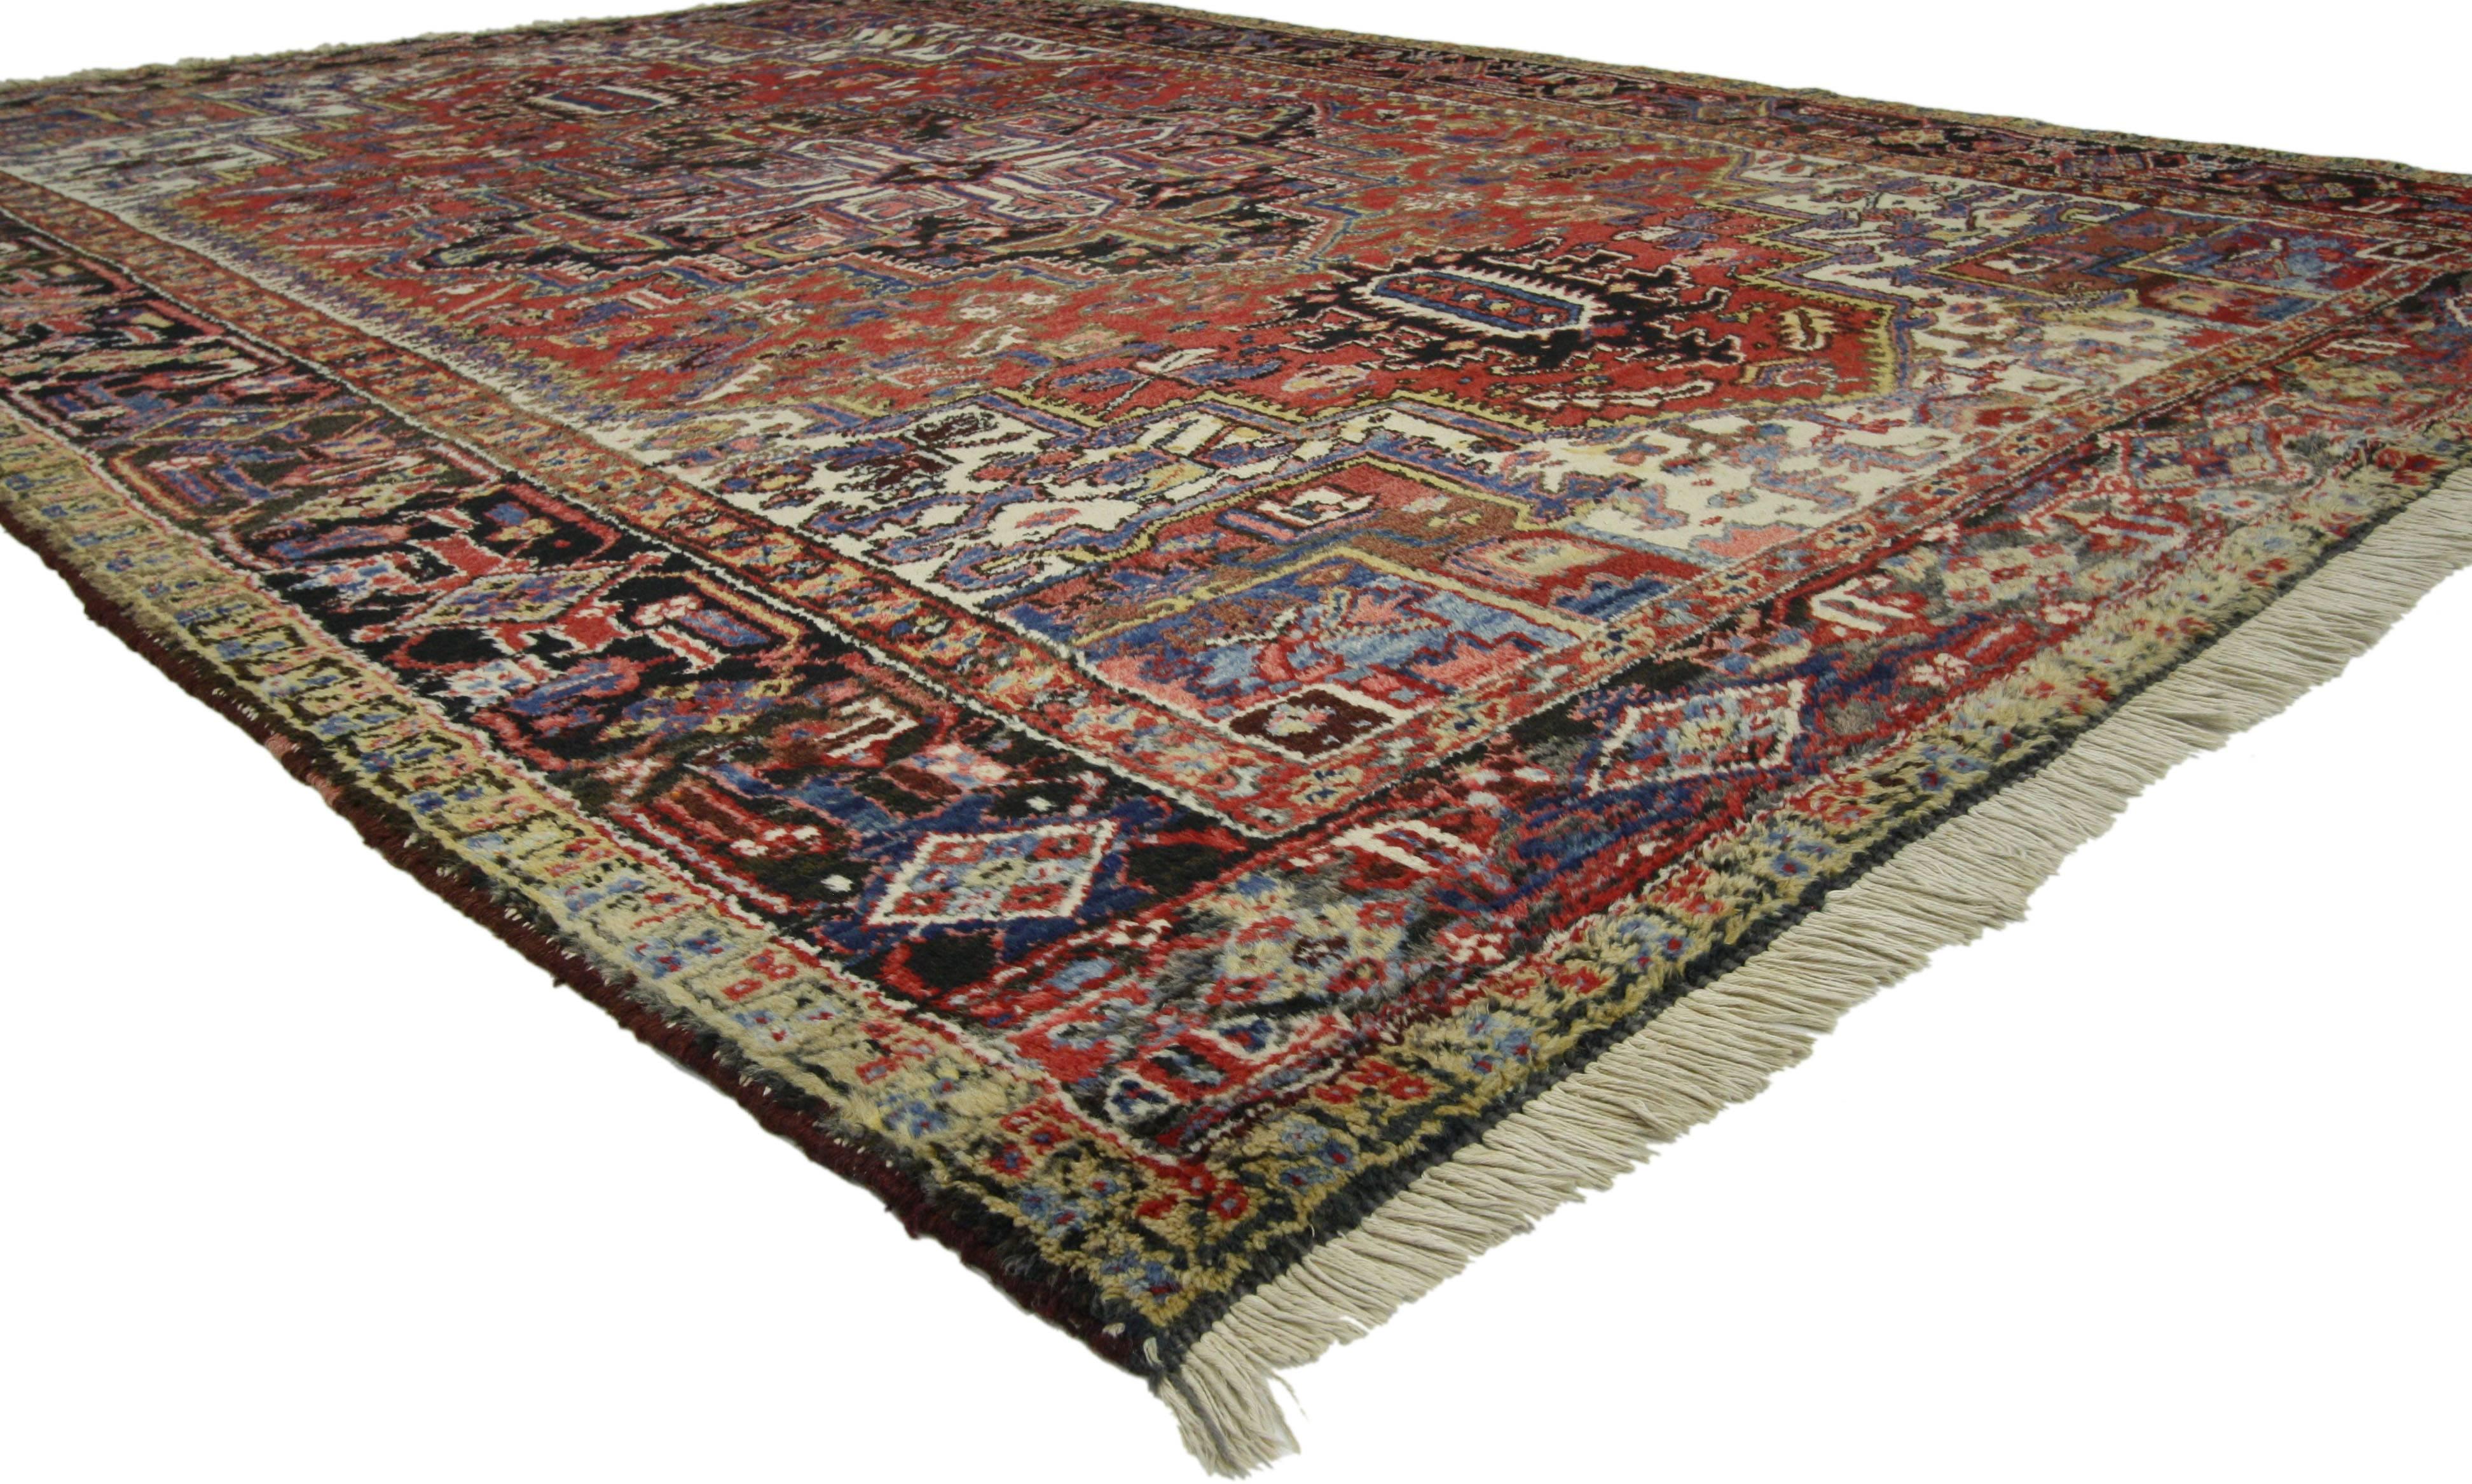 72713 Antique Persian Heriz Rug, 07'03 x 10'06. With a traditional refined color palette, striking appeal, and architectural design elements, this hand knotted wool antique Persian Heriz rug can beautifully blend modern, contemporary, and